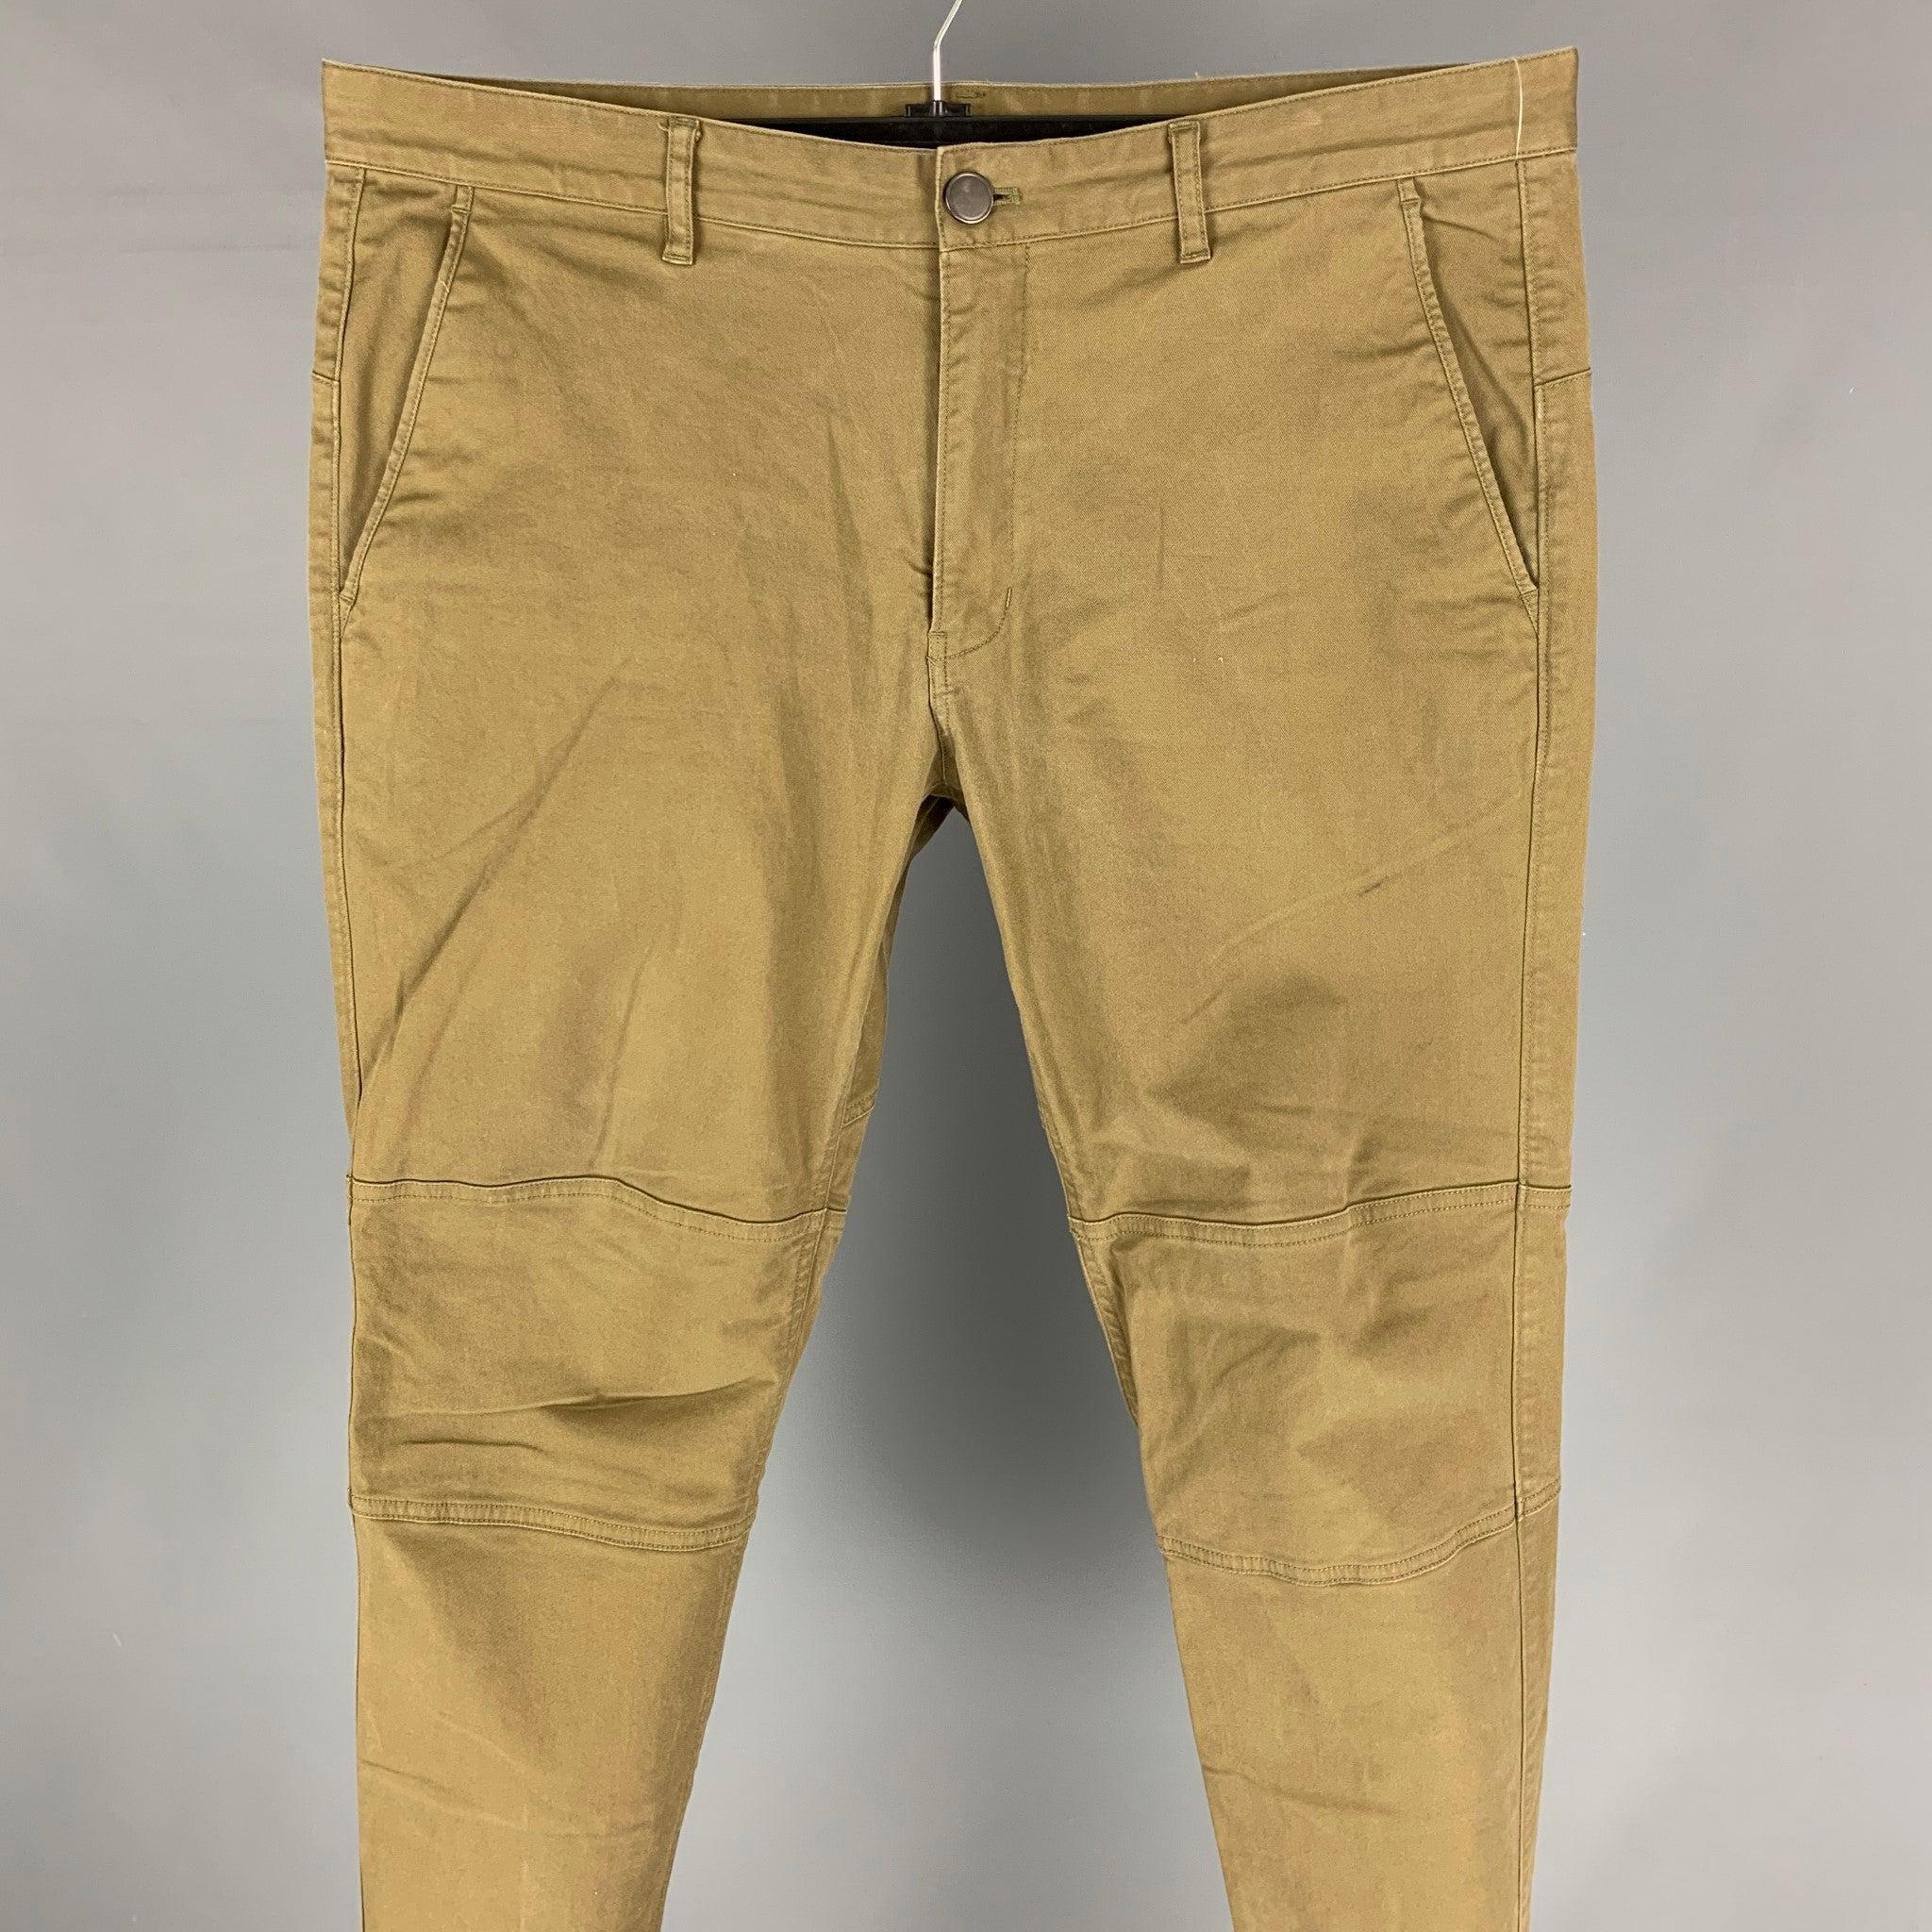 THEORY casual pants comes in a khaki cotton / polyurethane featuring a straight leg, knee panels, slim fit, and a zip fly closure.
Very Good
Pre-Owned Condition. 

Marked:   36 

Measurements: 
  Waist: 36 inches  Rise: 10.5 inches  Inseam: 30